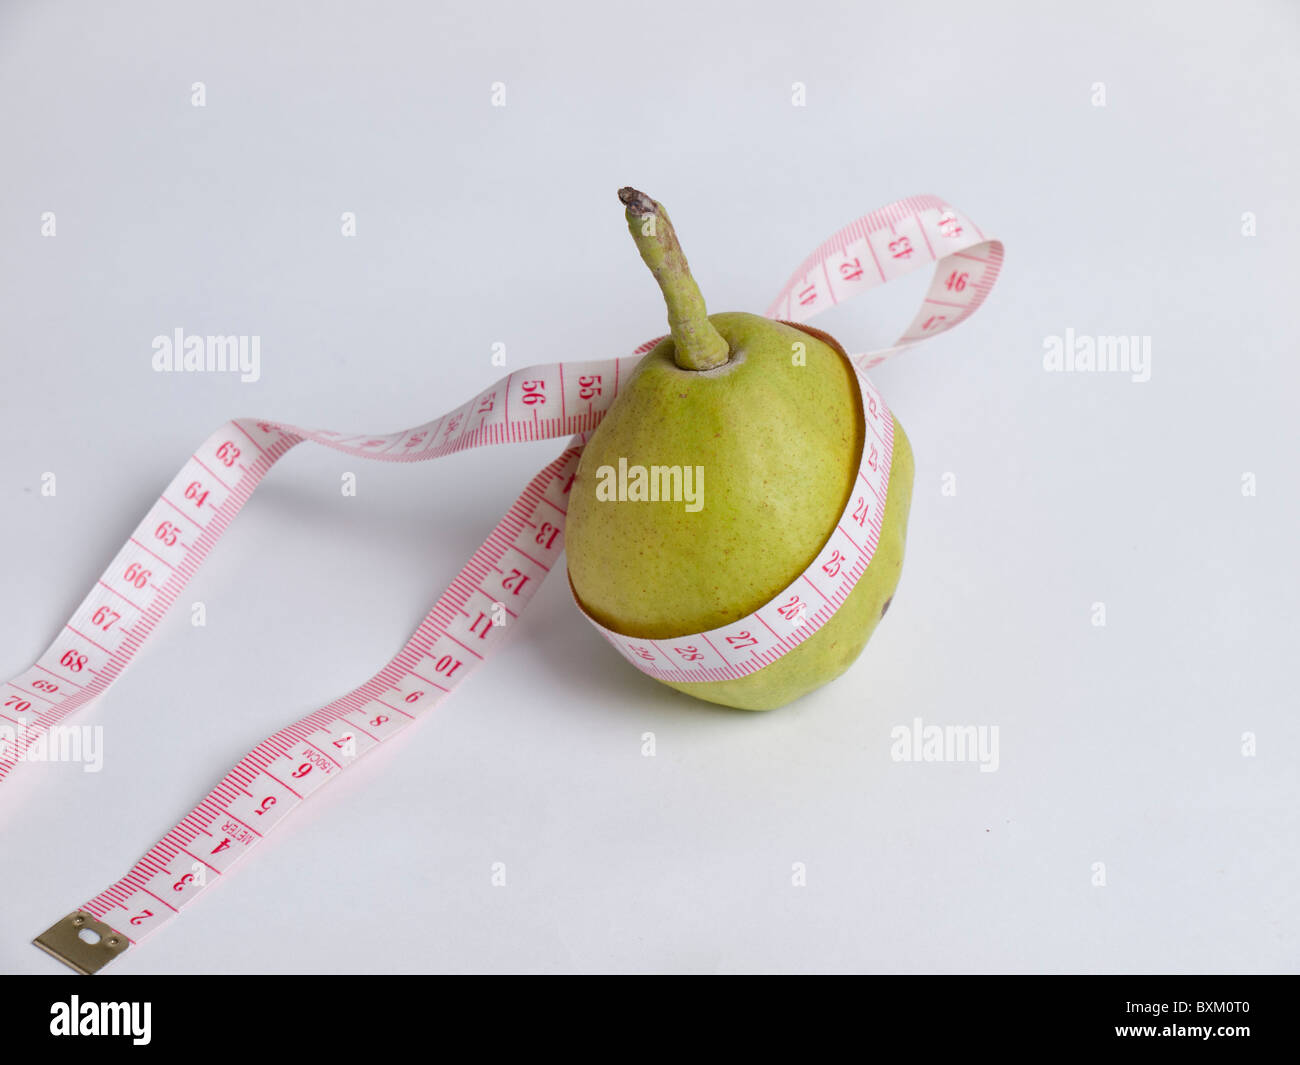 Ripe green pear with measuring tape, A diet consisting of fruits can aid in weight loss. Stock Photo